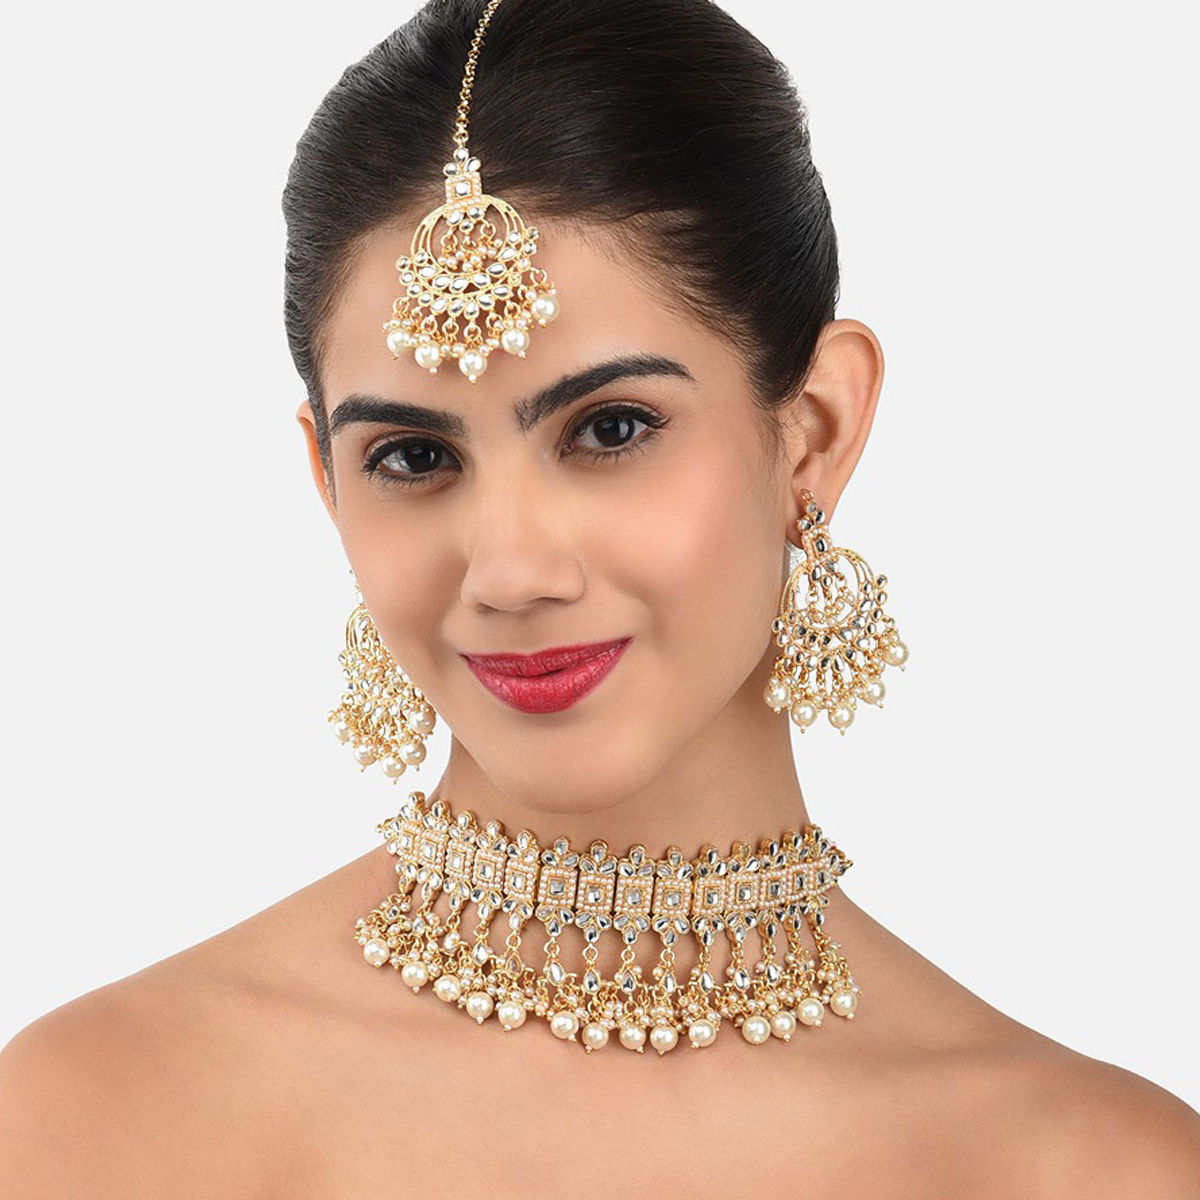 Buy Bridal Jewelry Set, Victorian Pearl Choker Necklace Earrings, Indian Bridal  Jewelry Set, Kundan Jewelry, Ivory Pearl Choker Statement Set Online in  India - Etsy